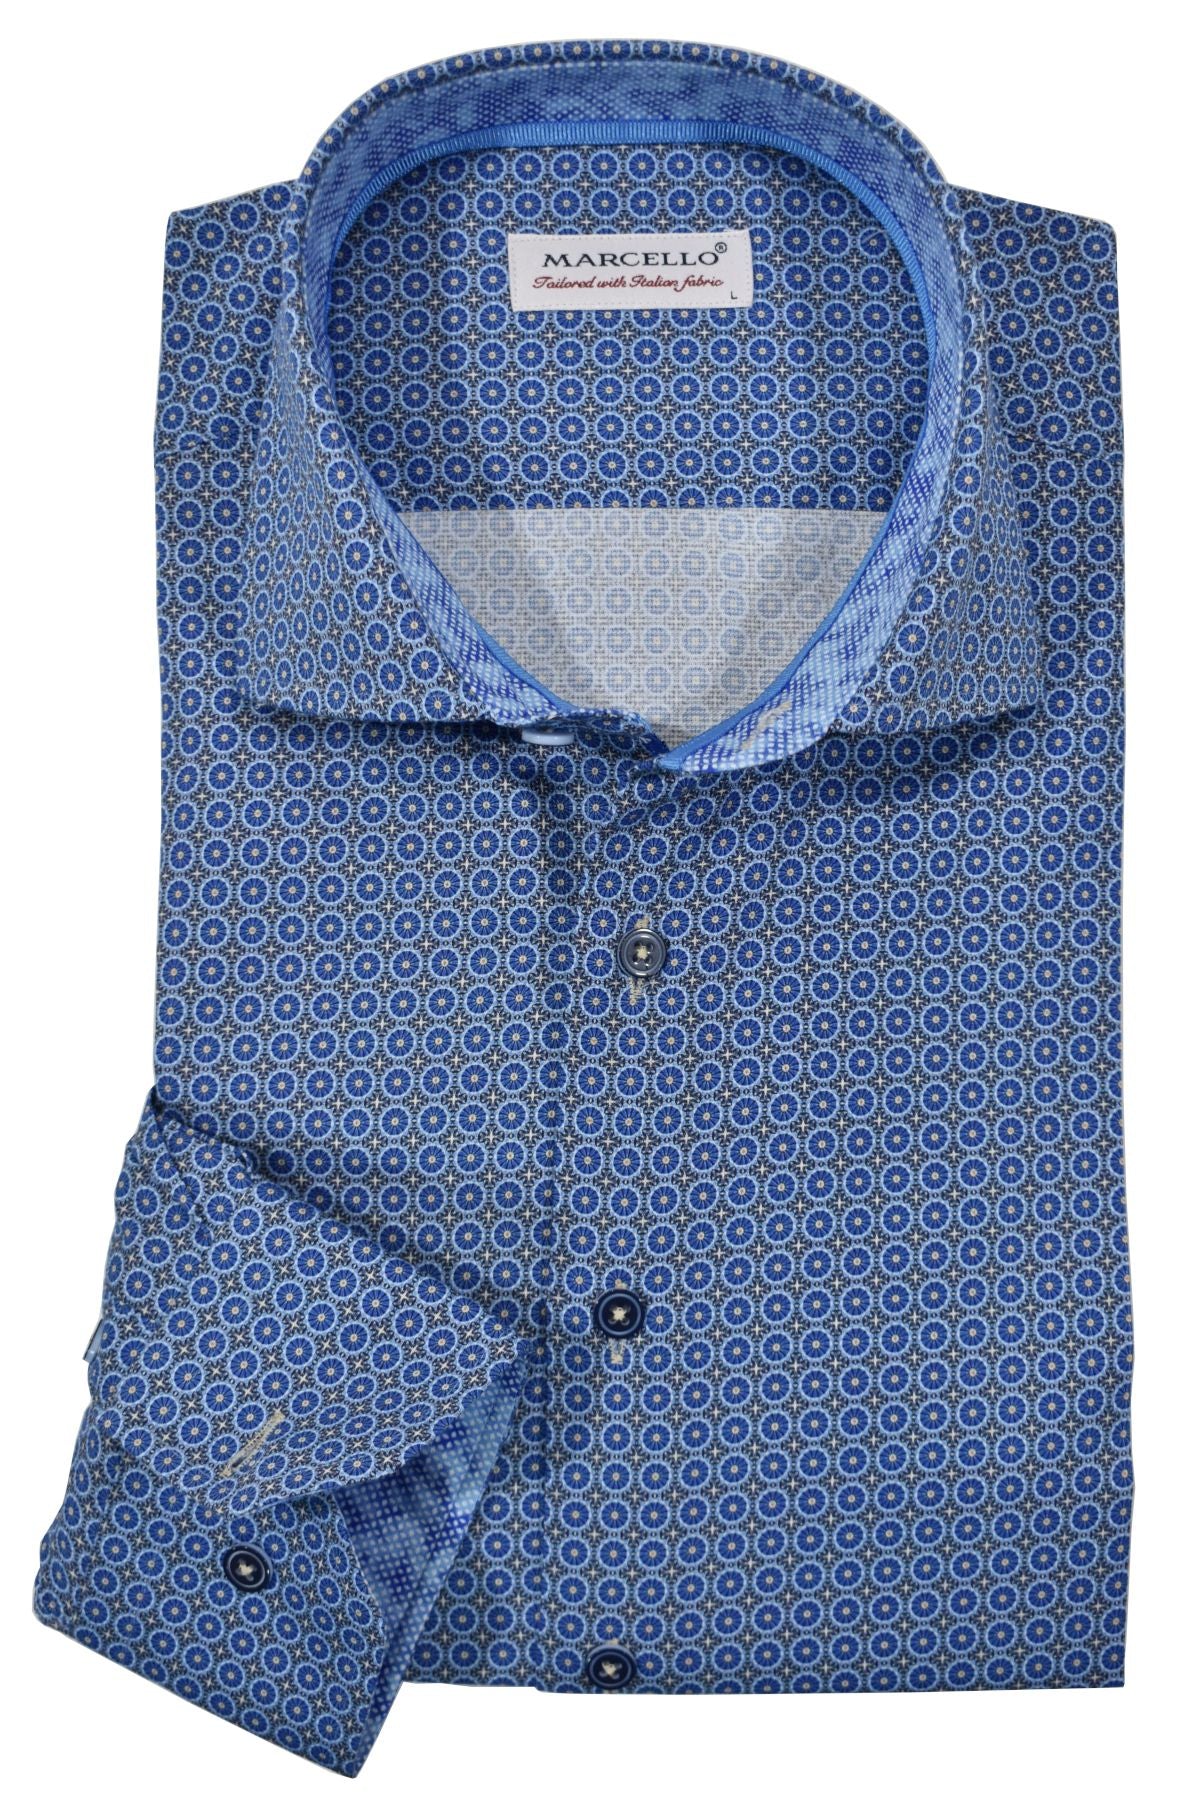 The mixed medallion features an exceptionally rich pattern in shades of blue to for a dress or casual image when paired with many colored bottoms. The bright feel to the shirt pattern creates an upbeat image for a traditional shirt pattern.  The fabric is soft to the touch, consisting of luxe cotton with a touch of lycra to provide diagonal stretch. The result is a luxurious feel with a little stretch for added comfort.